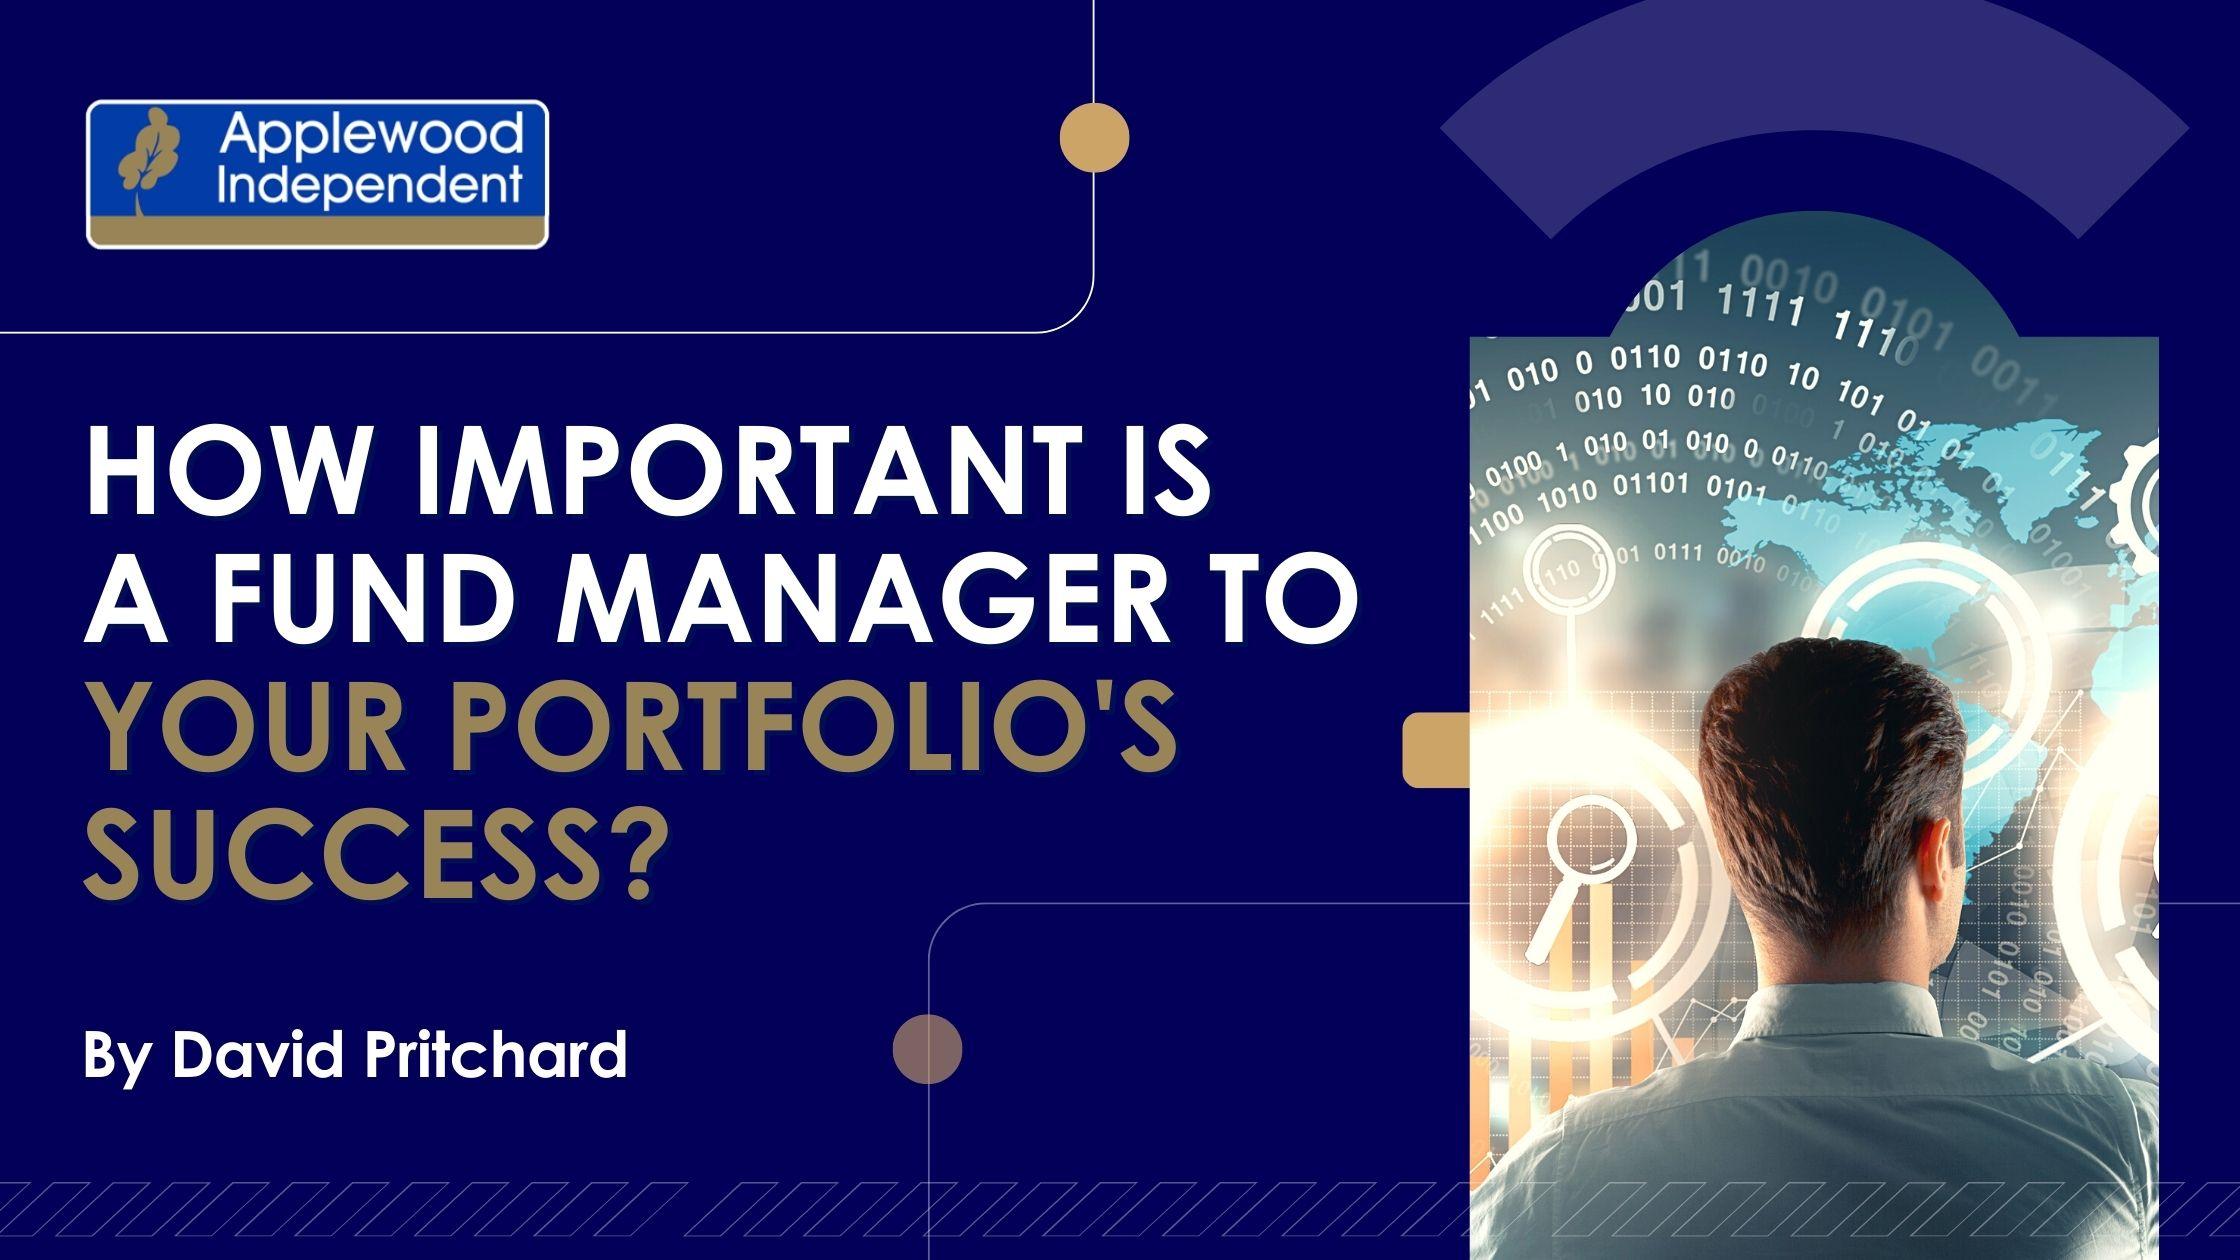 How Important Is A Fund Manager To Your Portfolio’s Success?